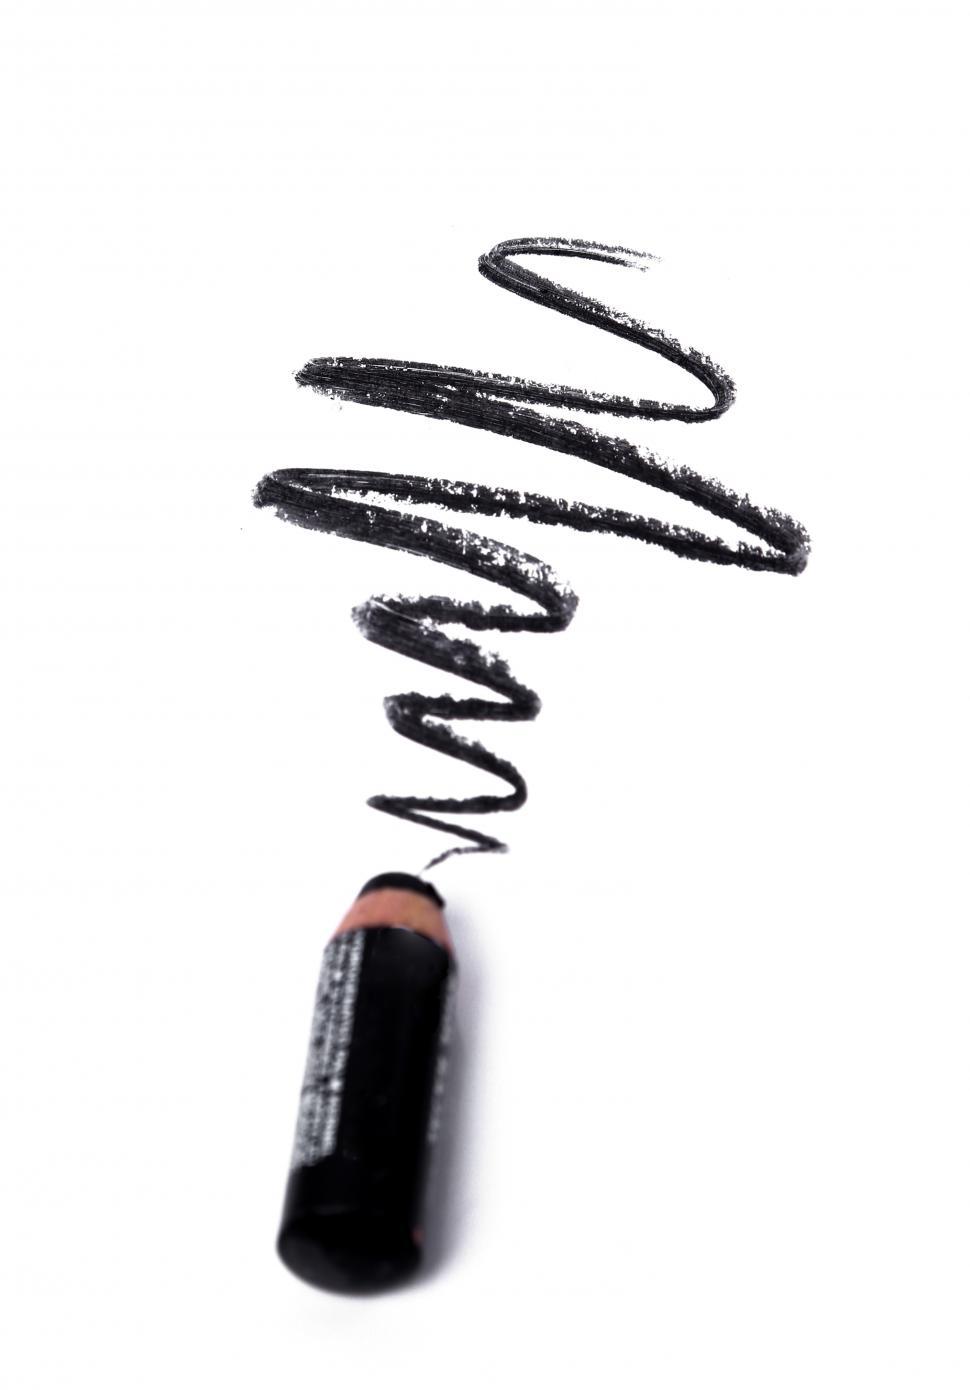 Free Image of Black cosmetic pencil 